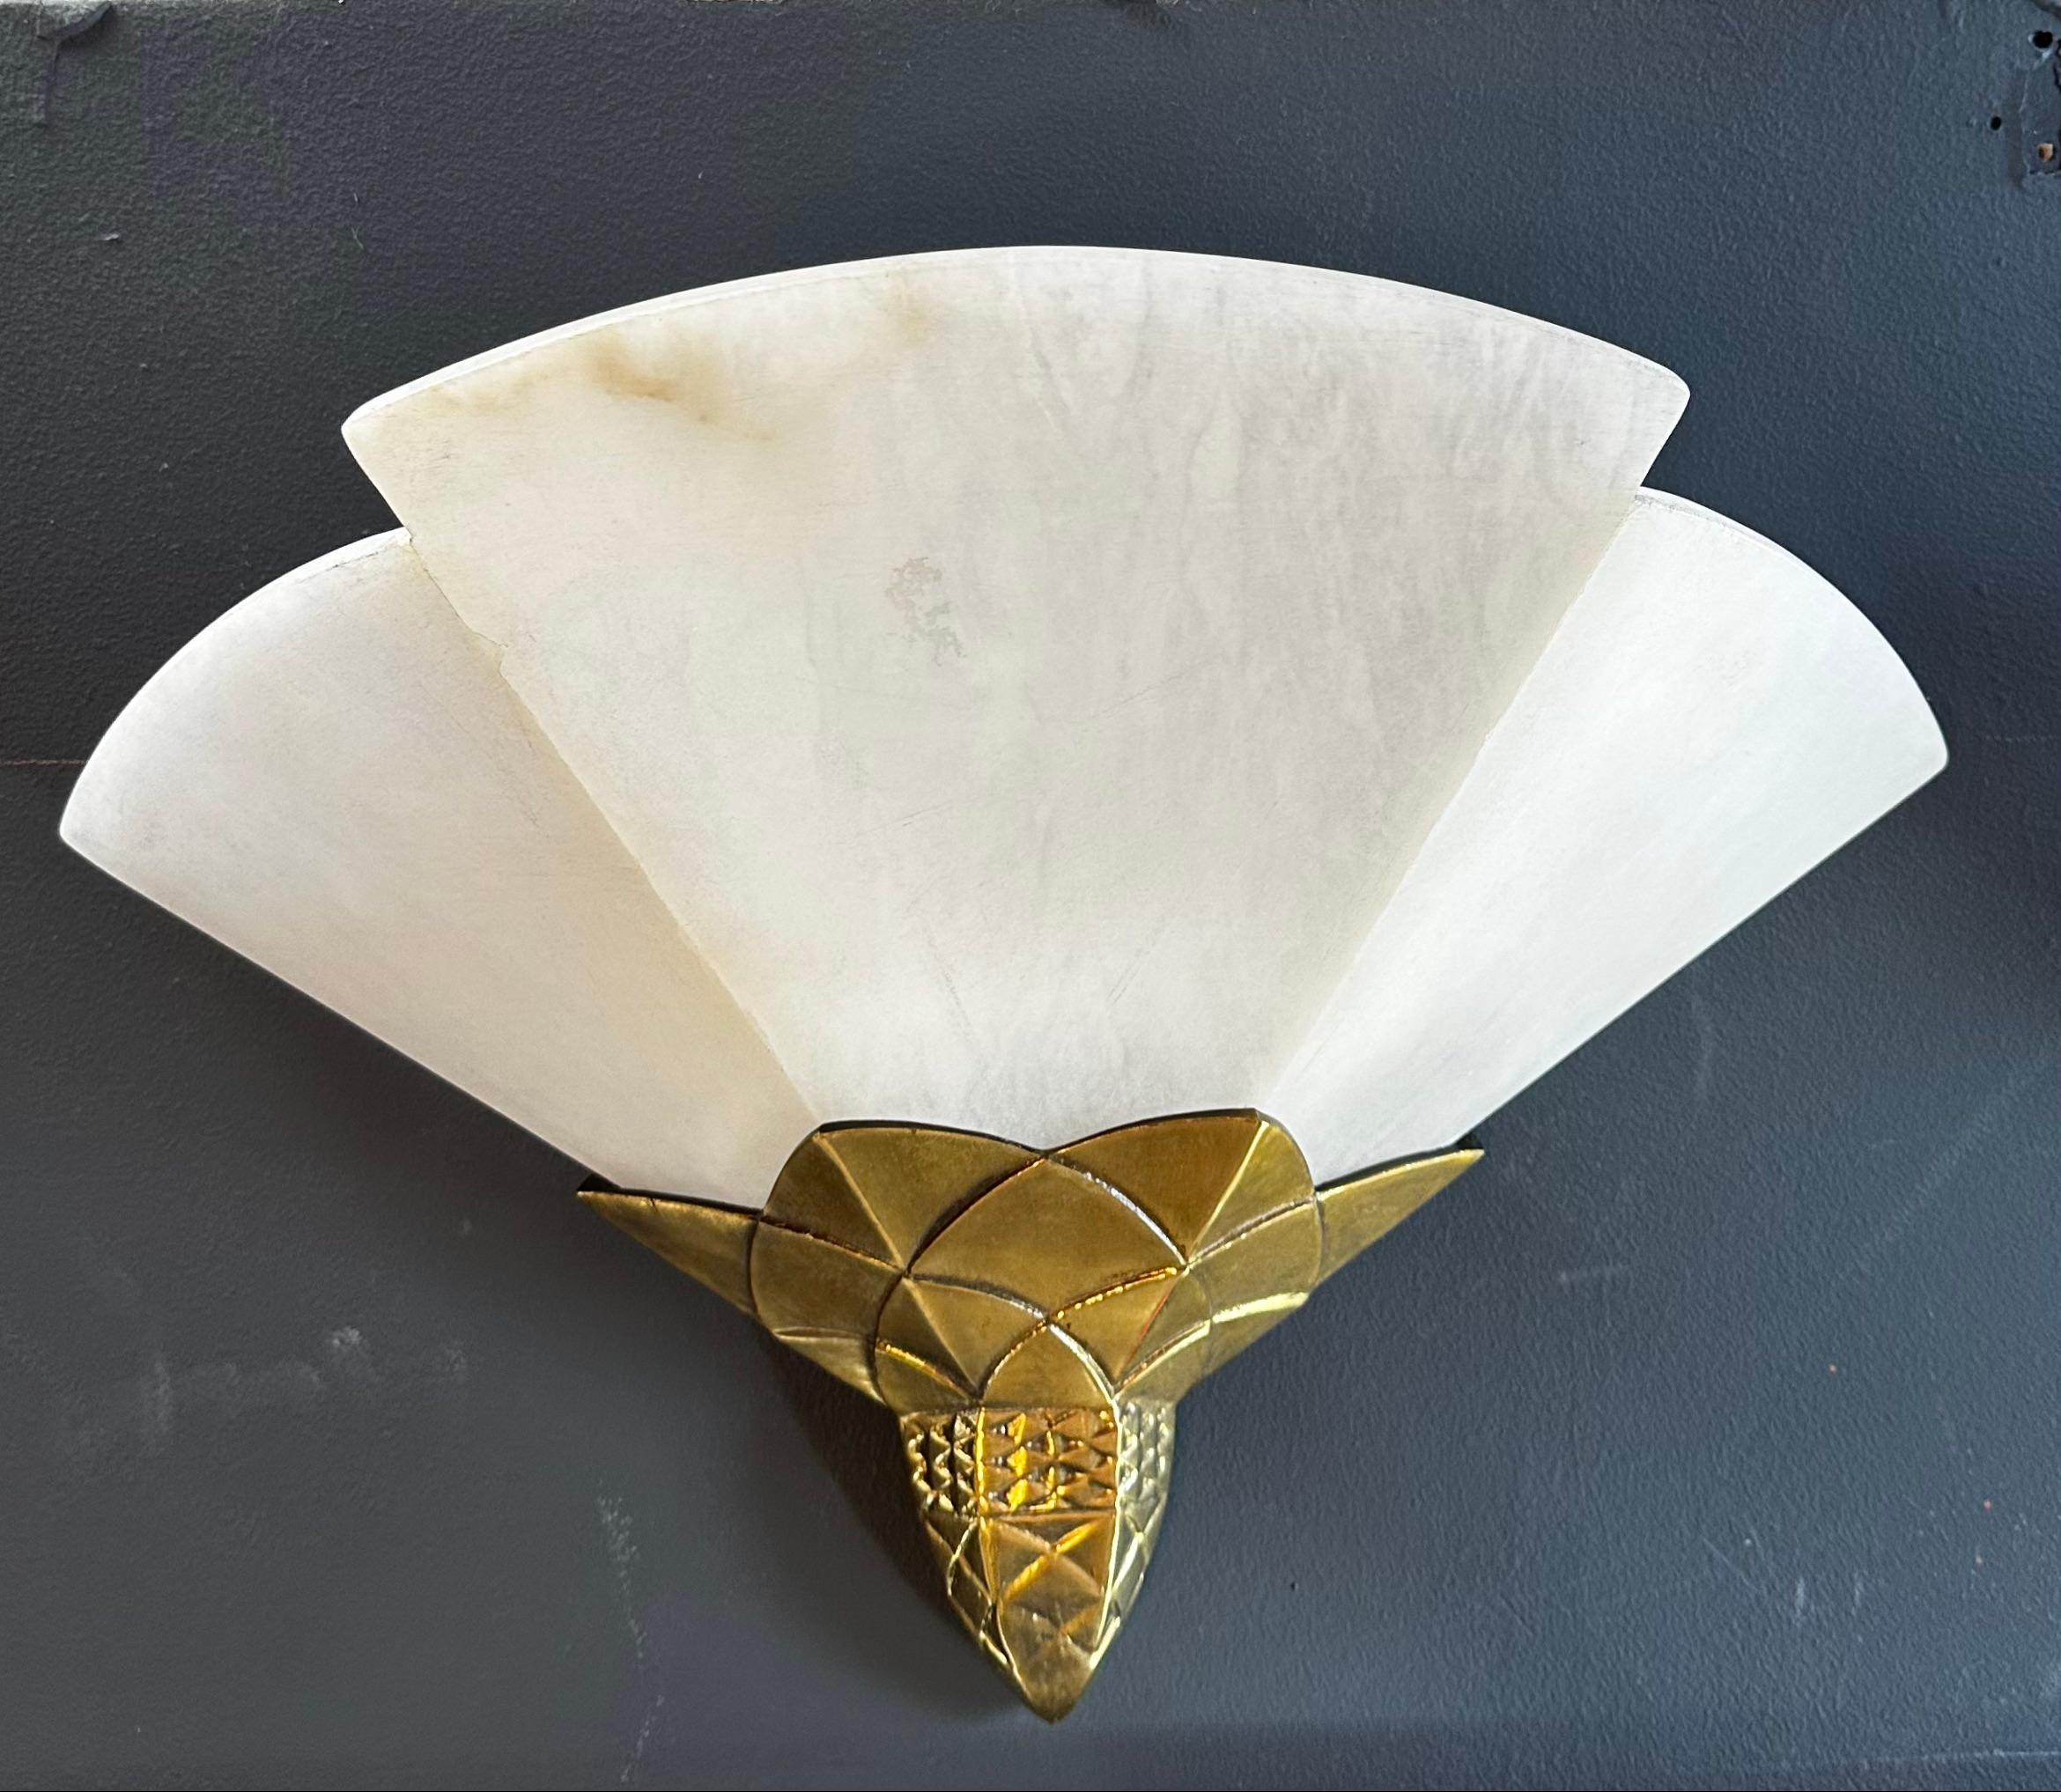 These wall sconces are a beautiful example of Mid-Century Modern design, featuring a simple yet elegant combination of brass and marble. Each sconce consists of a rectangular brass frame that is mounted on the wall, with a curved arm extending